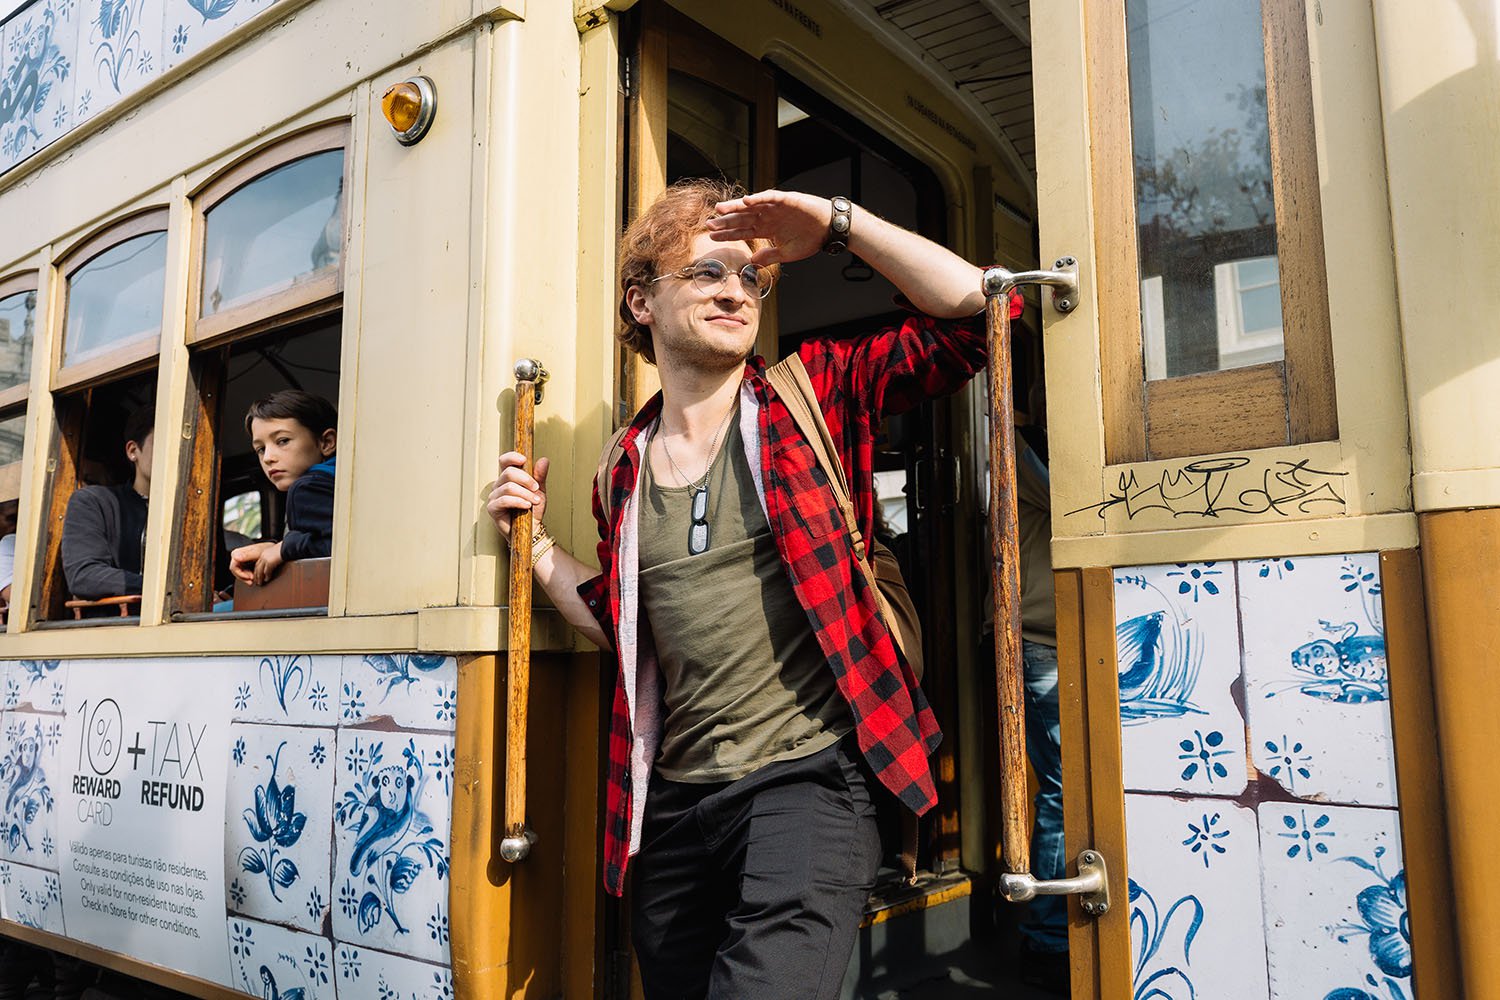 An international student hitching a ride on Porto's classic tram